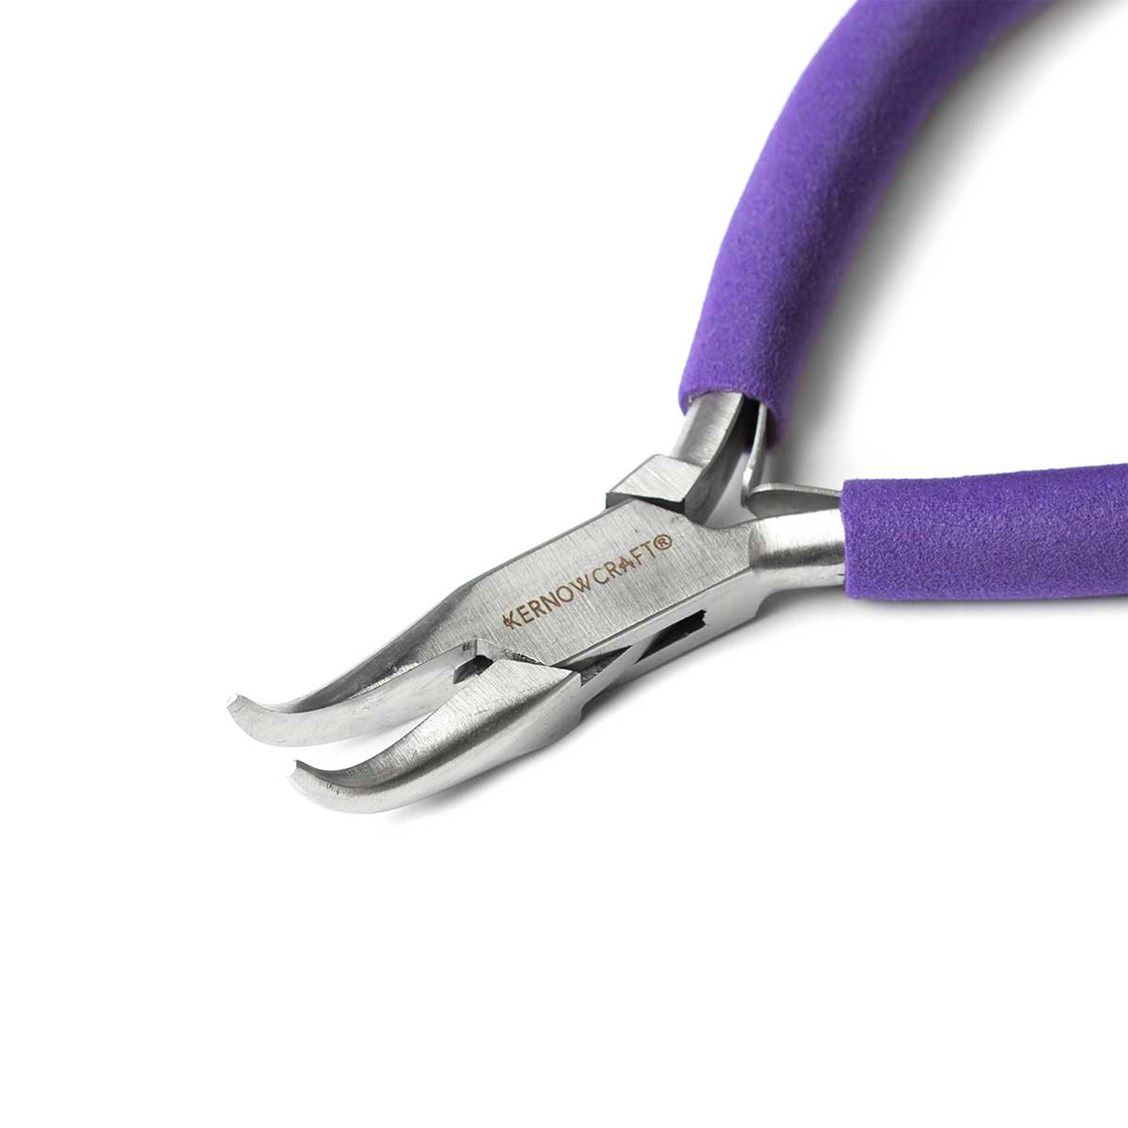 How To Use Chain Nose Pliers In Jewellery Making 